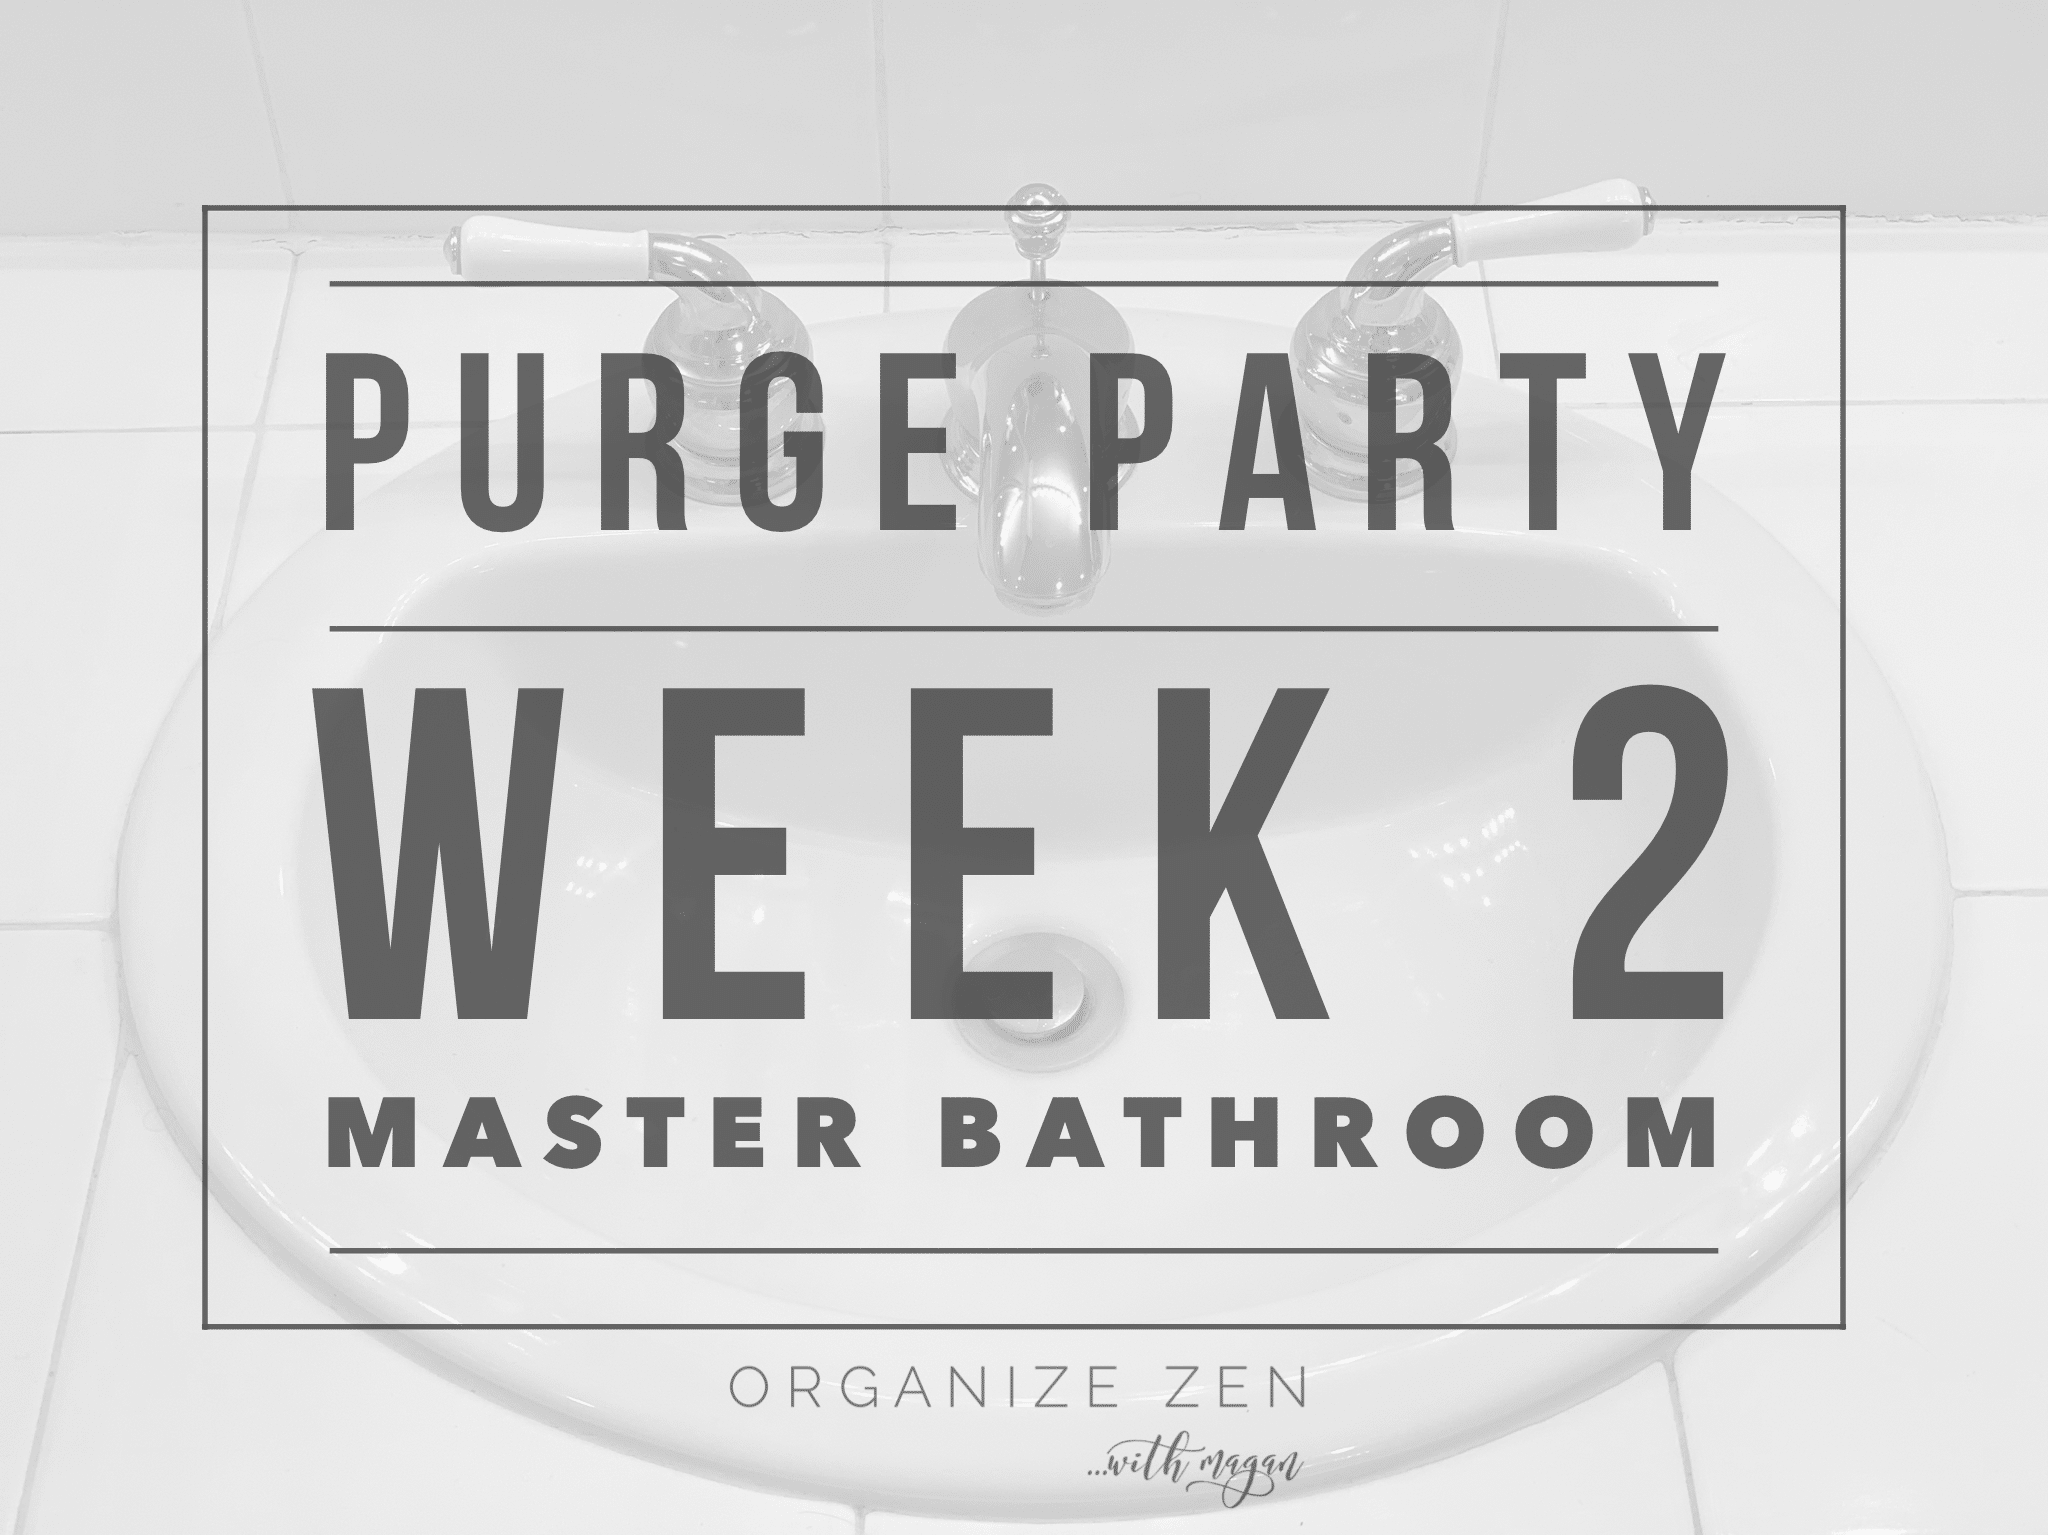 Purge Party in the Master Bathroom